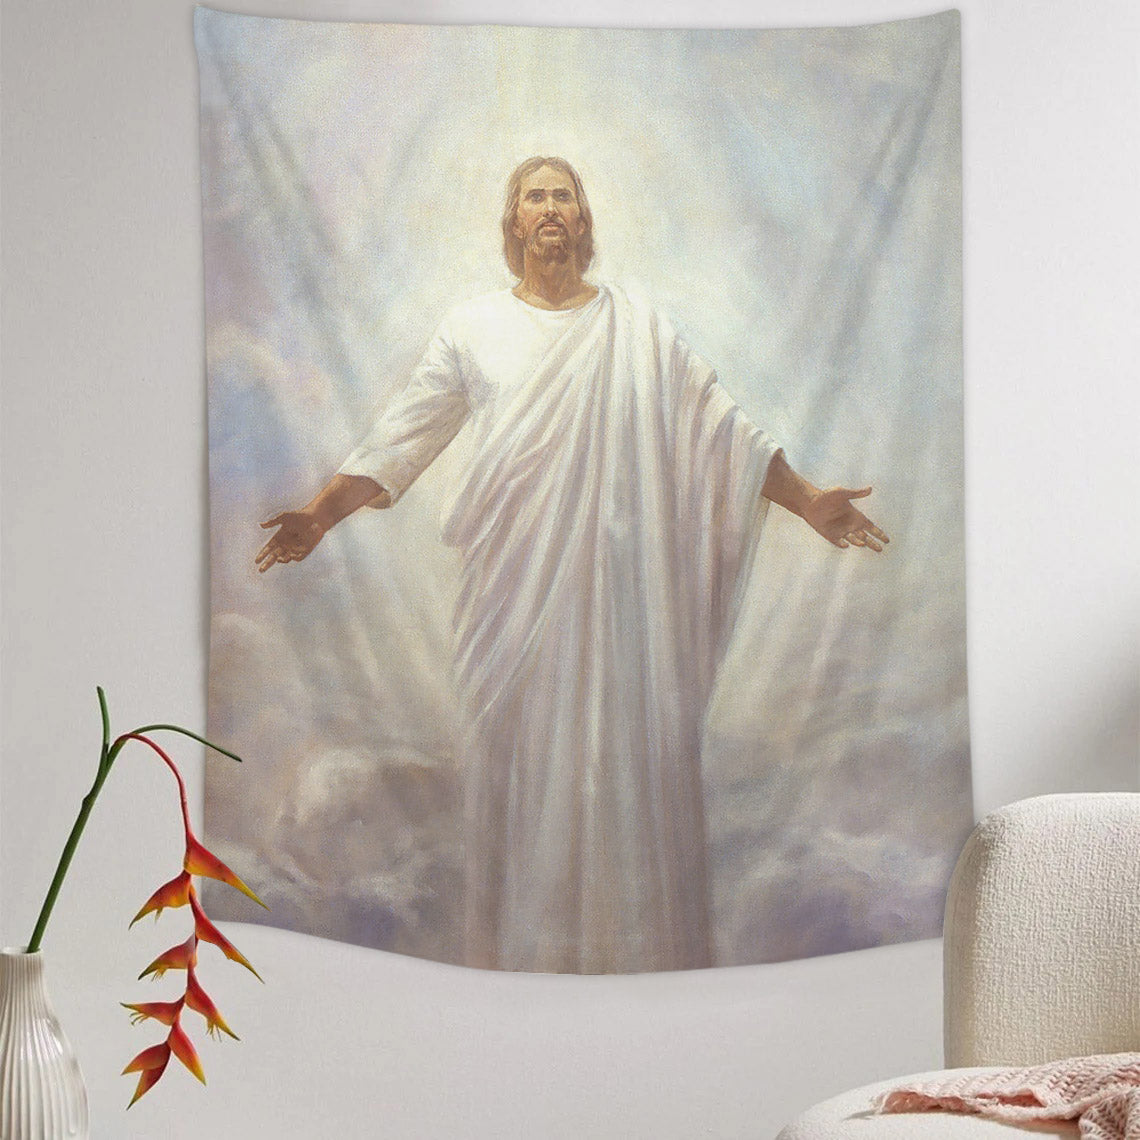 Resurrected Christ Tapestry - Jesus Picture - Religious Tapestry - Christian Tapestry Wall Hangings